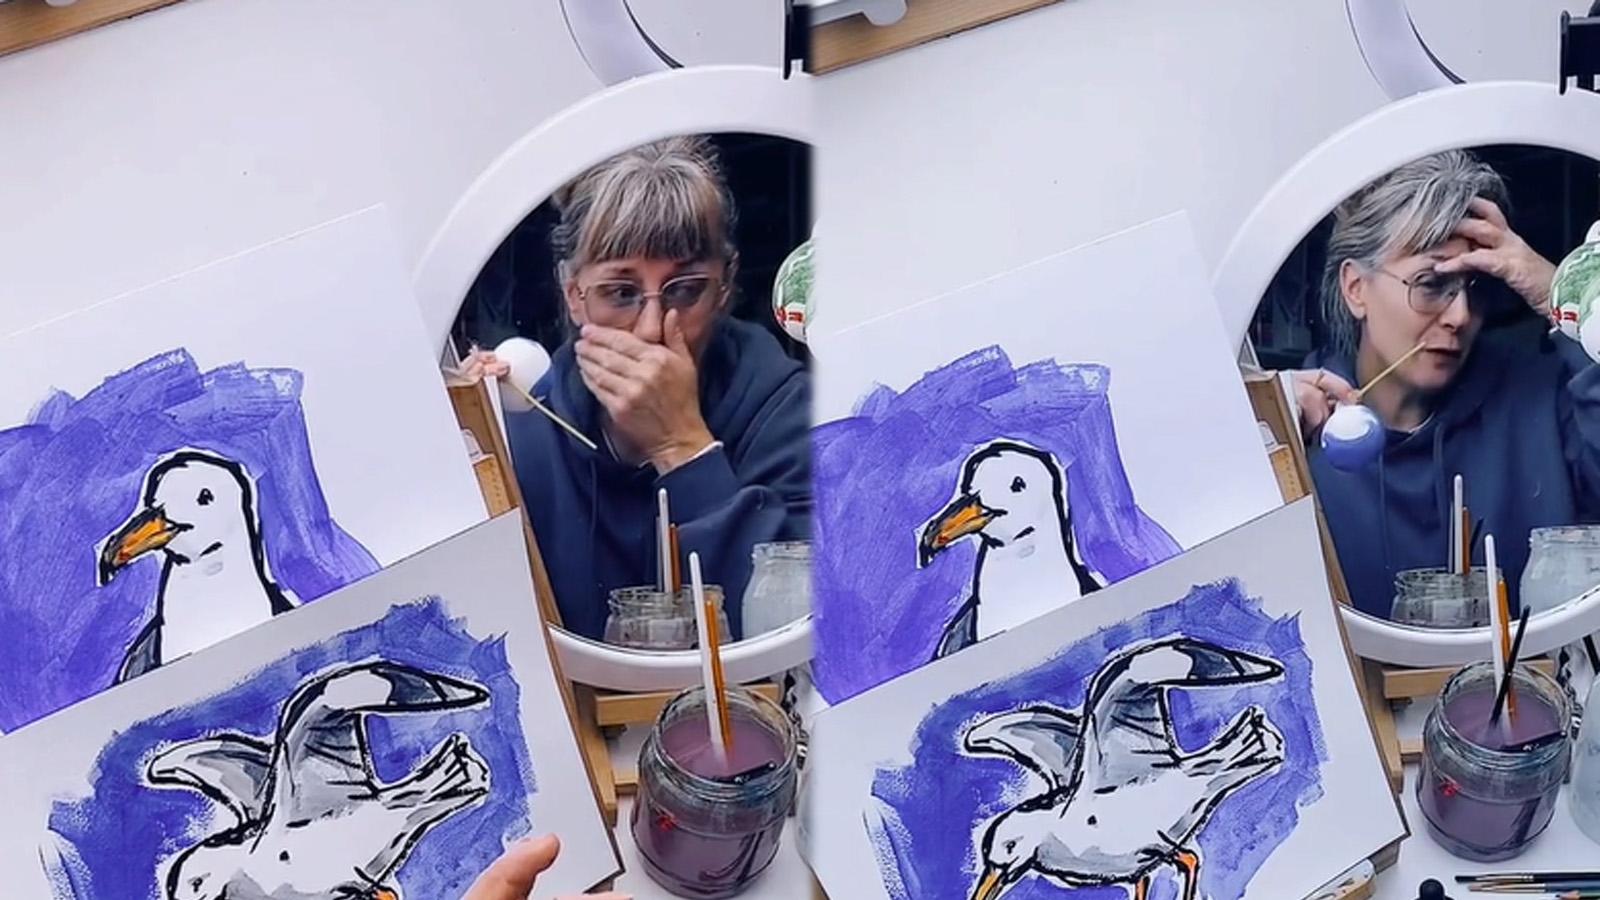 Woman brought to tears after 400 people show up to watch her paint on TikTok Live